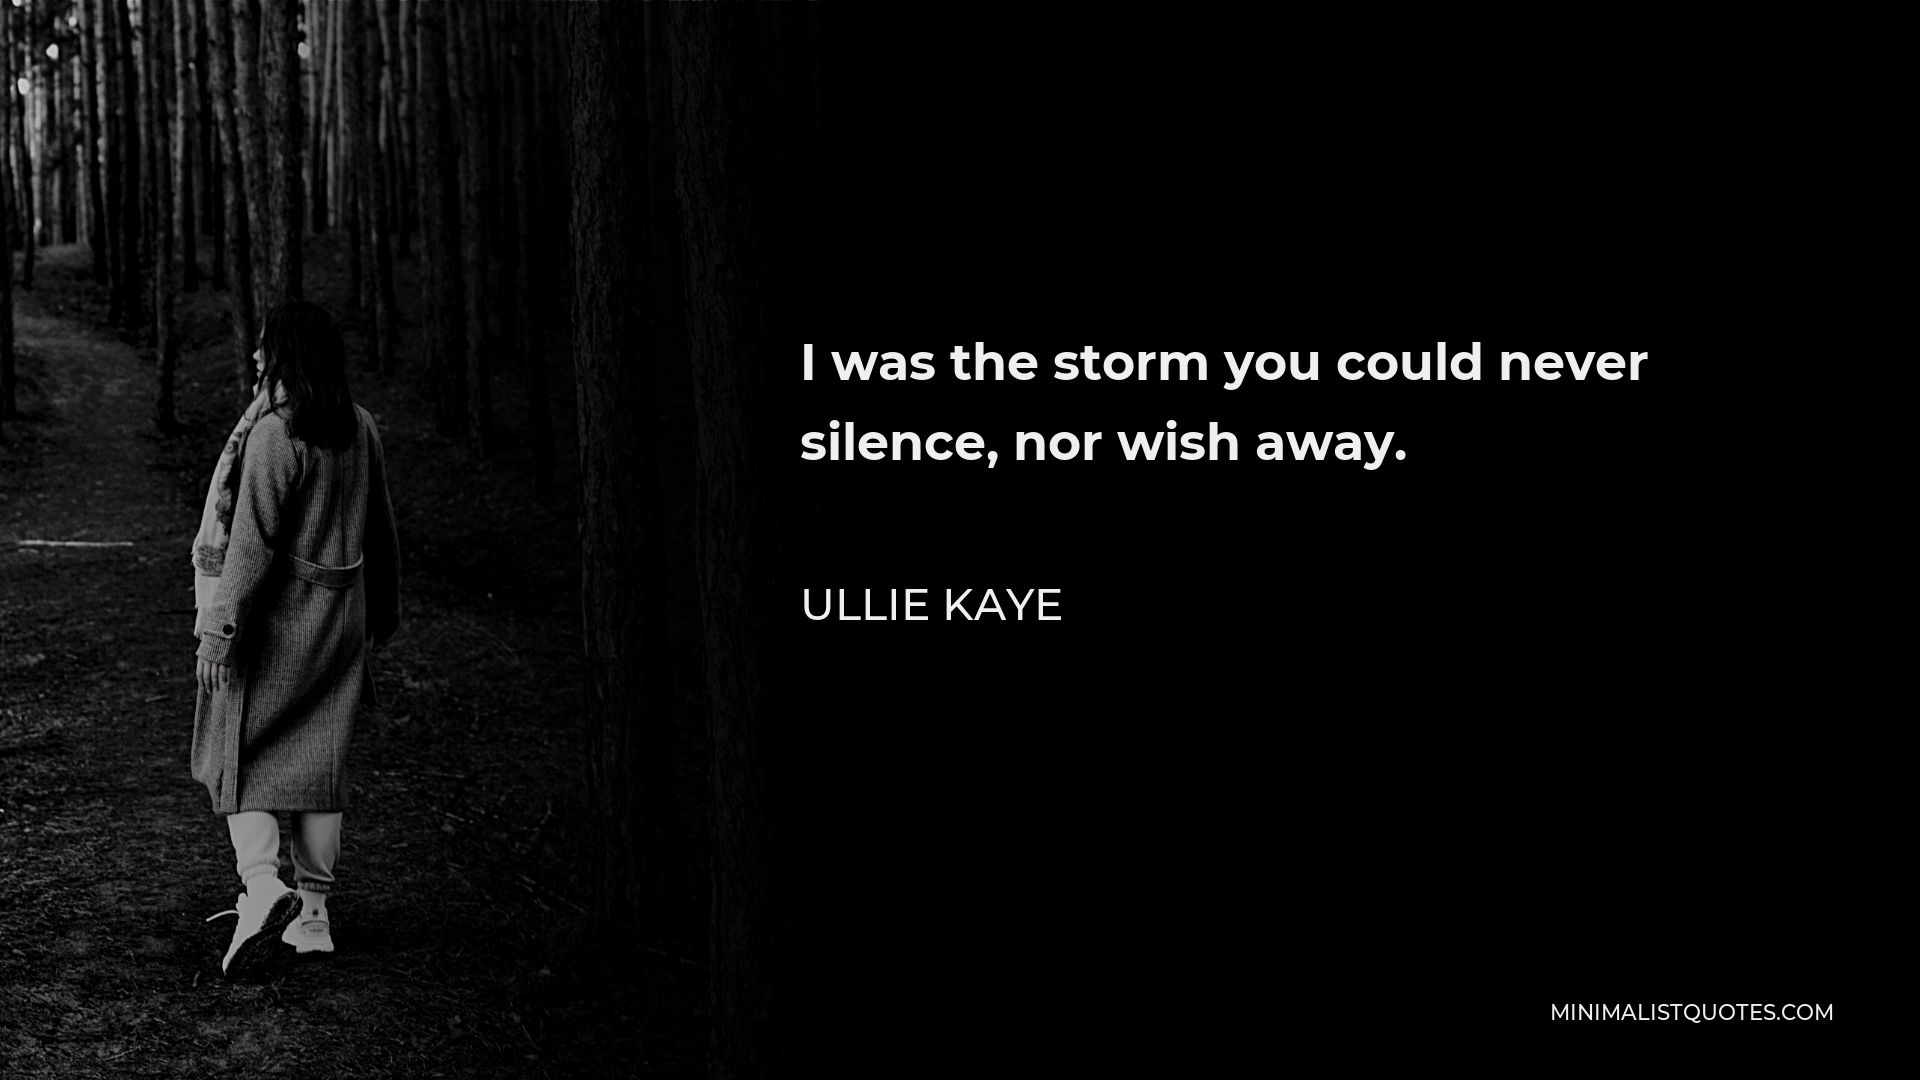 Ullie Kaye Quote - I was the storm you could never silence, nor wish away.